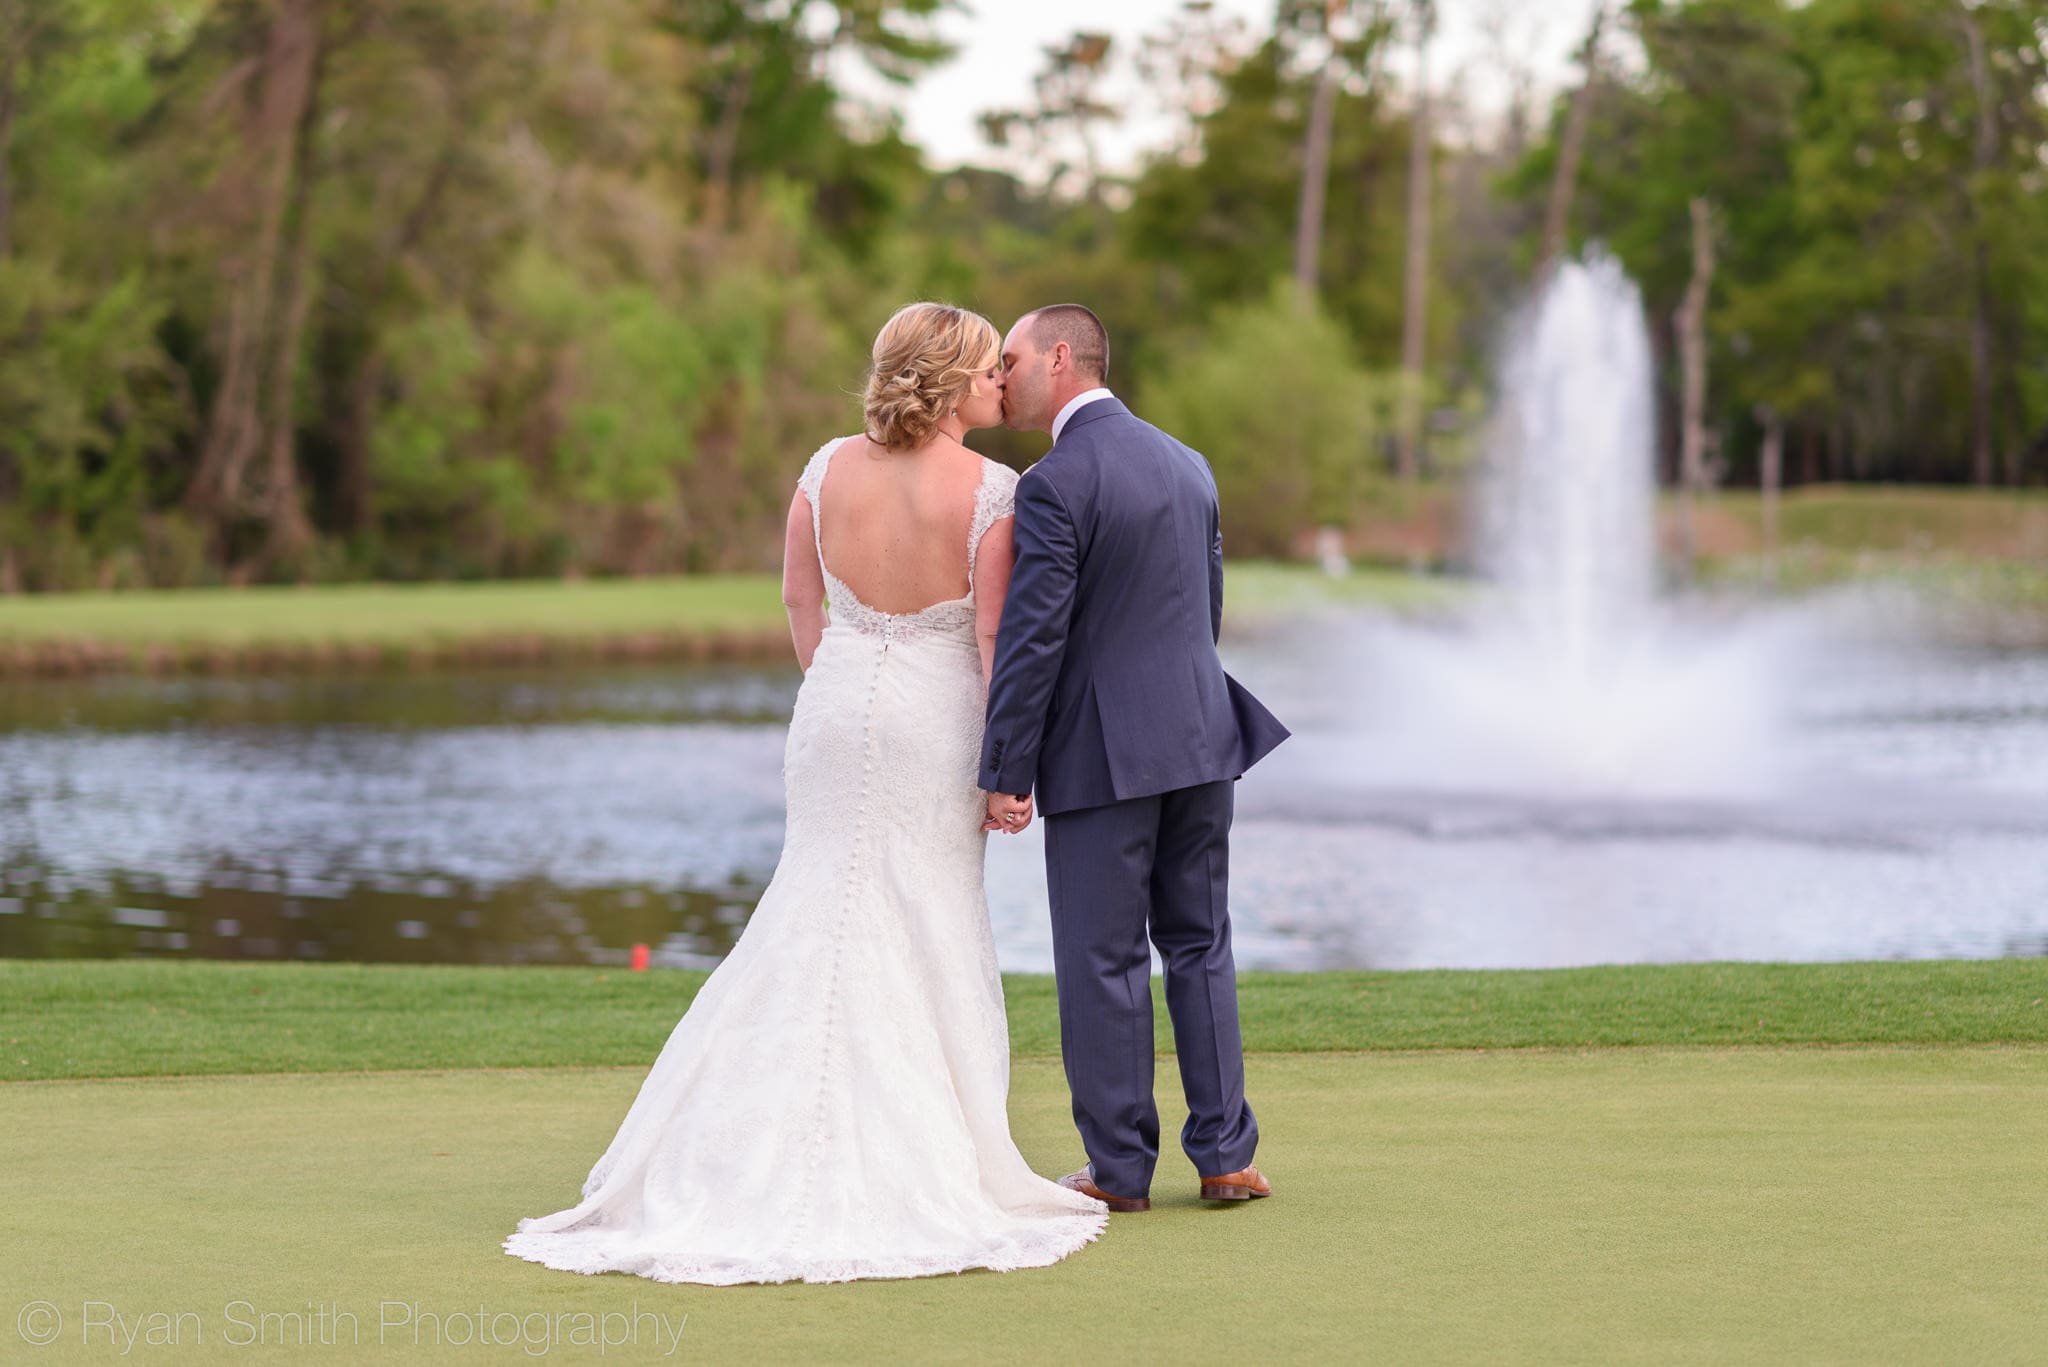 Kiss in front of the golf course lake - Pawleys Plantation